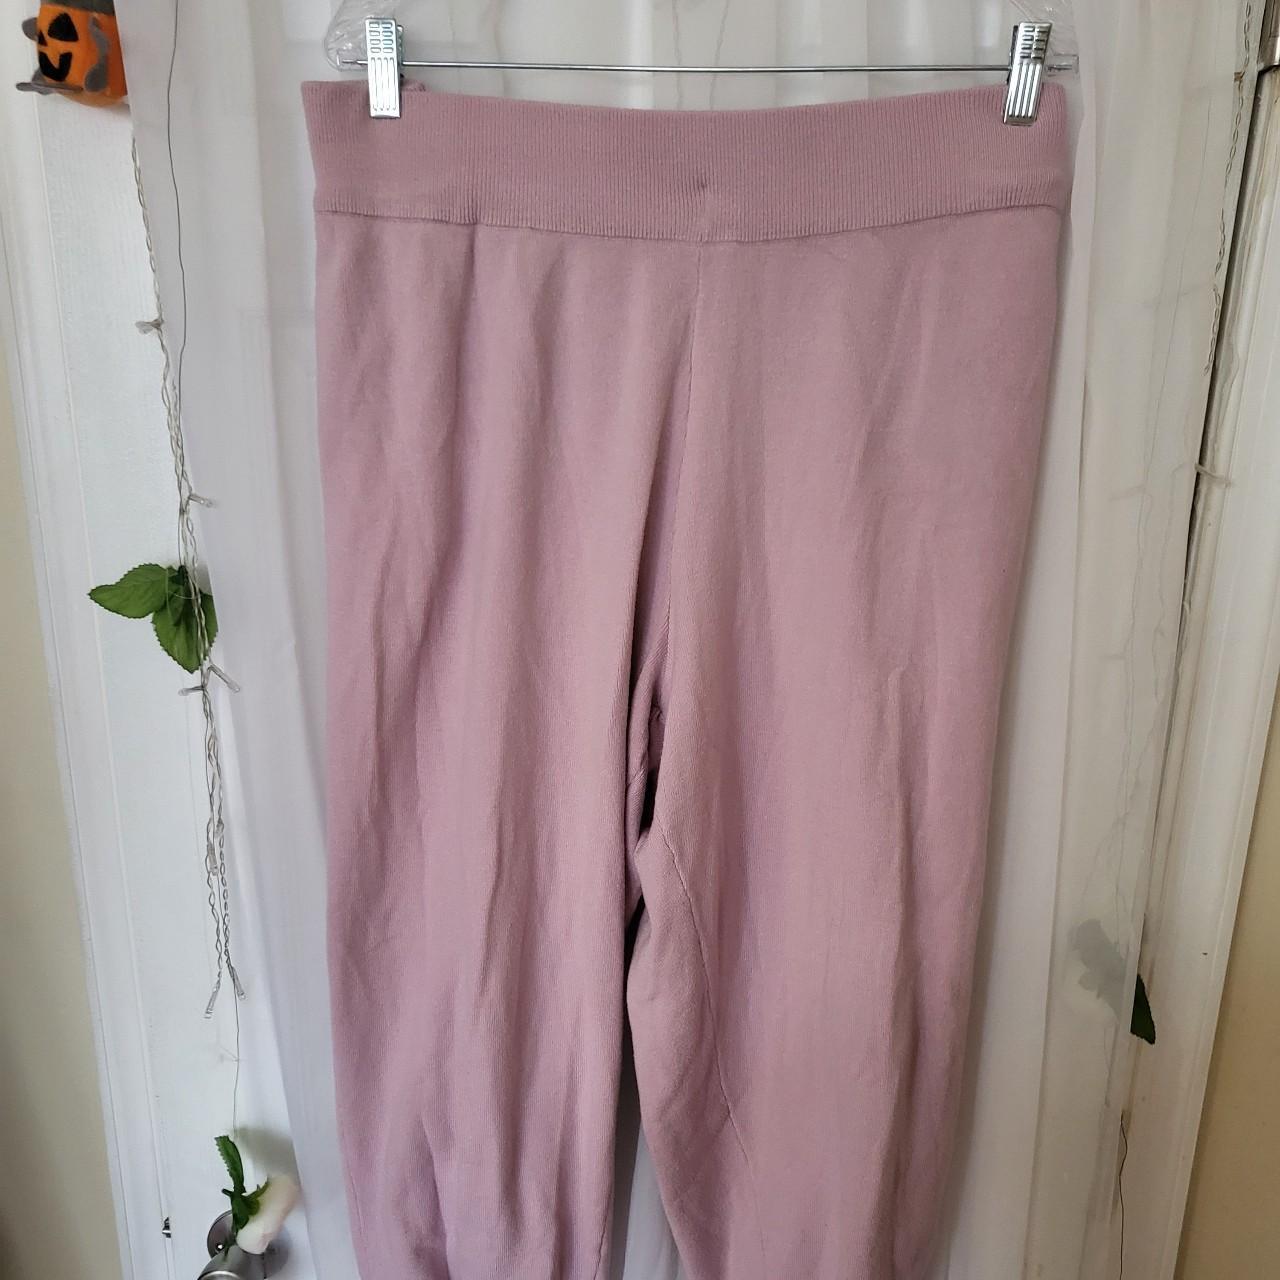 Plus size 2x Grey pink sweatpants from Target! These - Depop